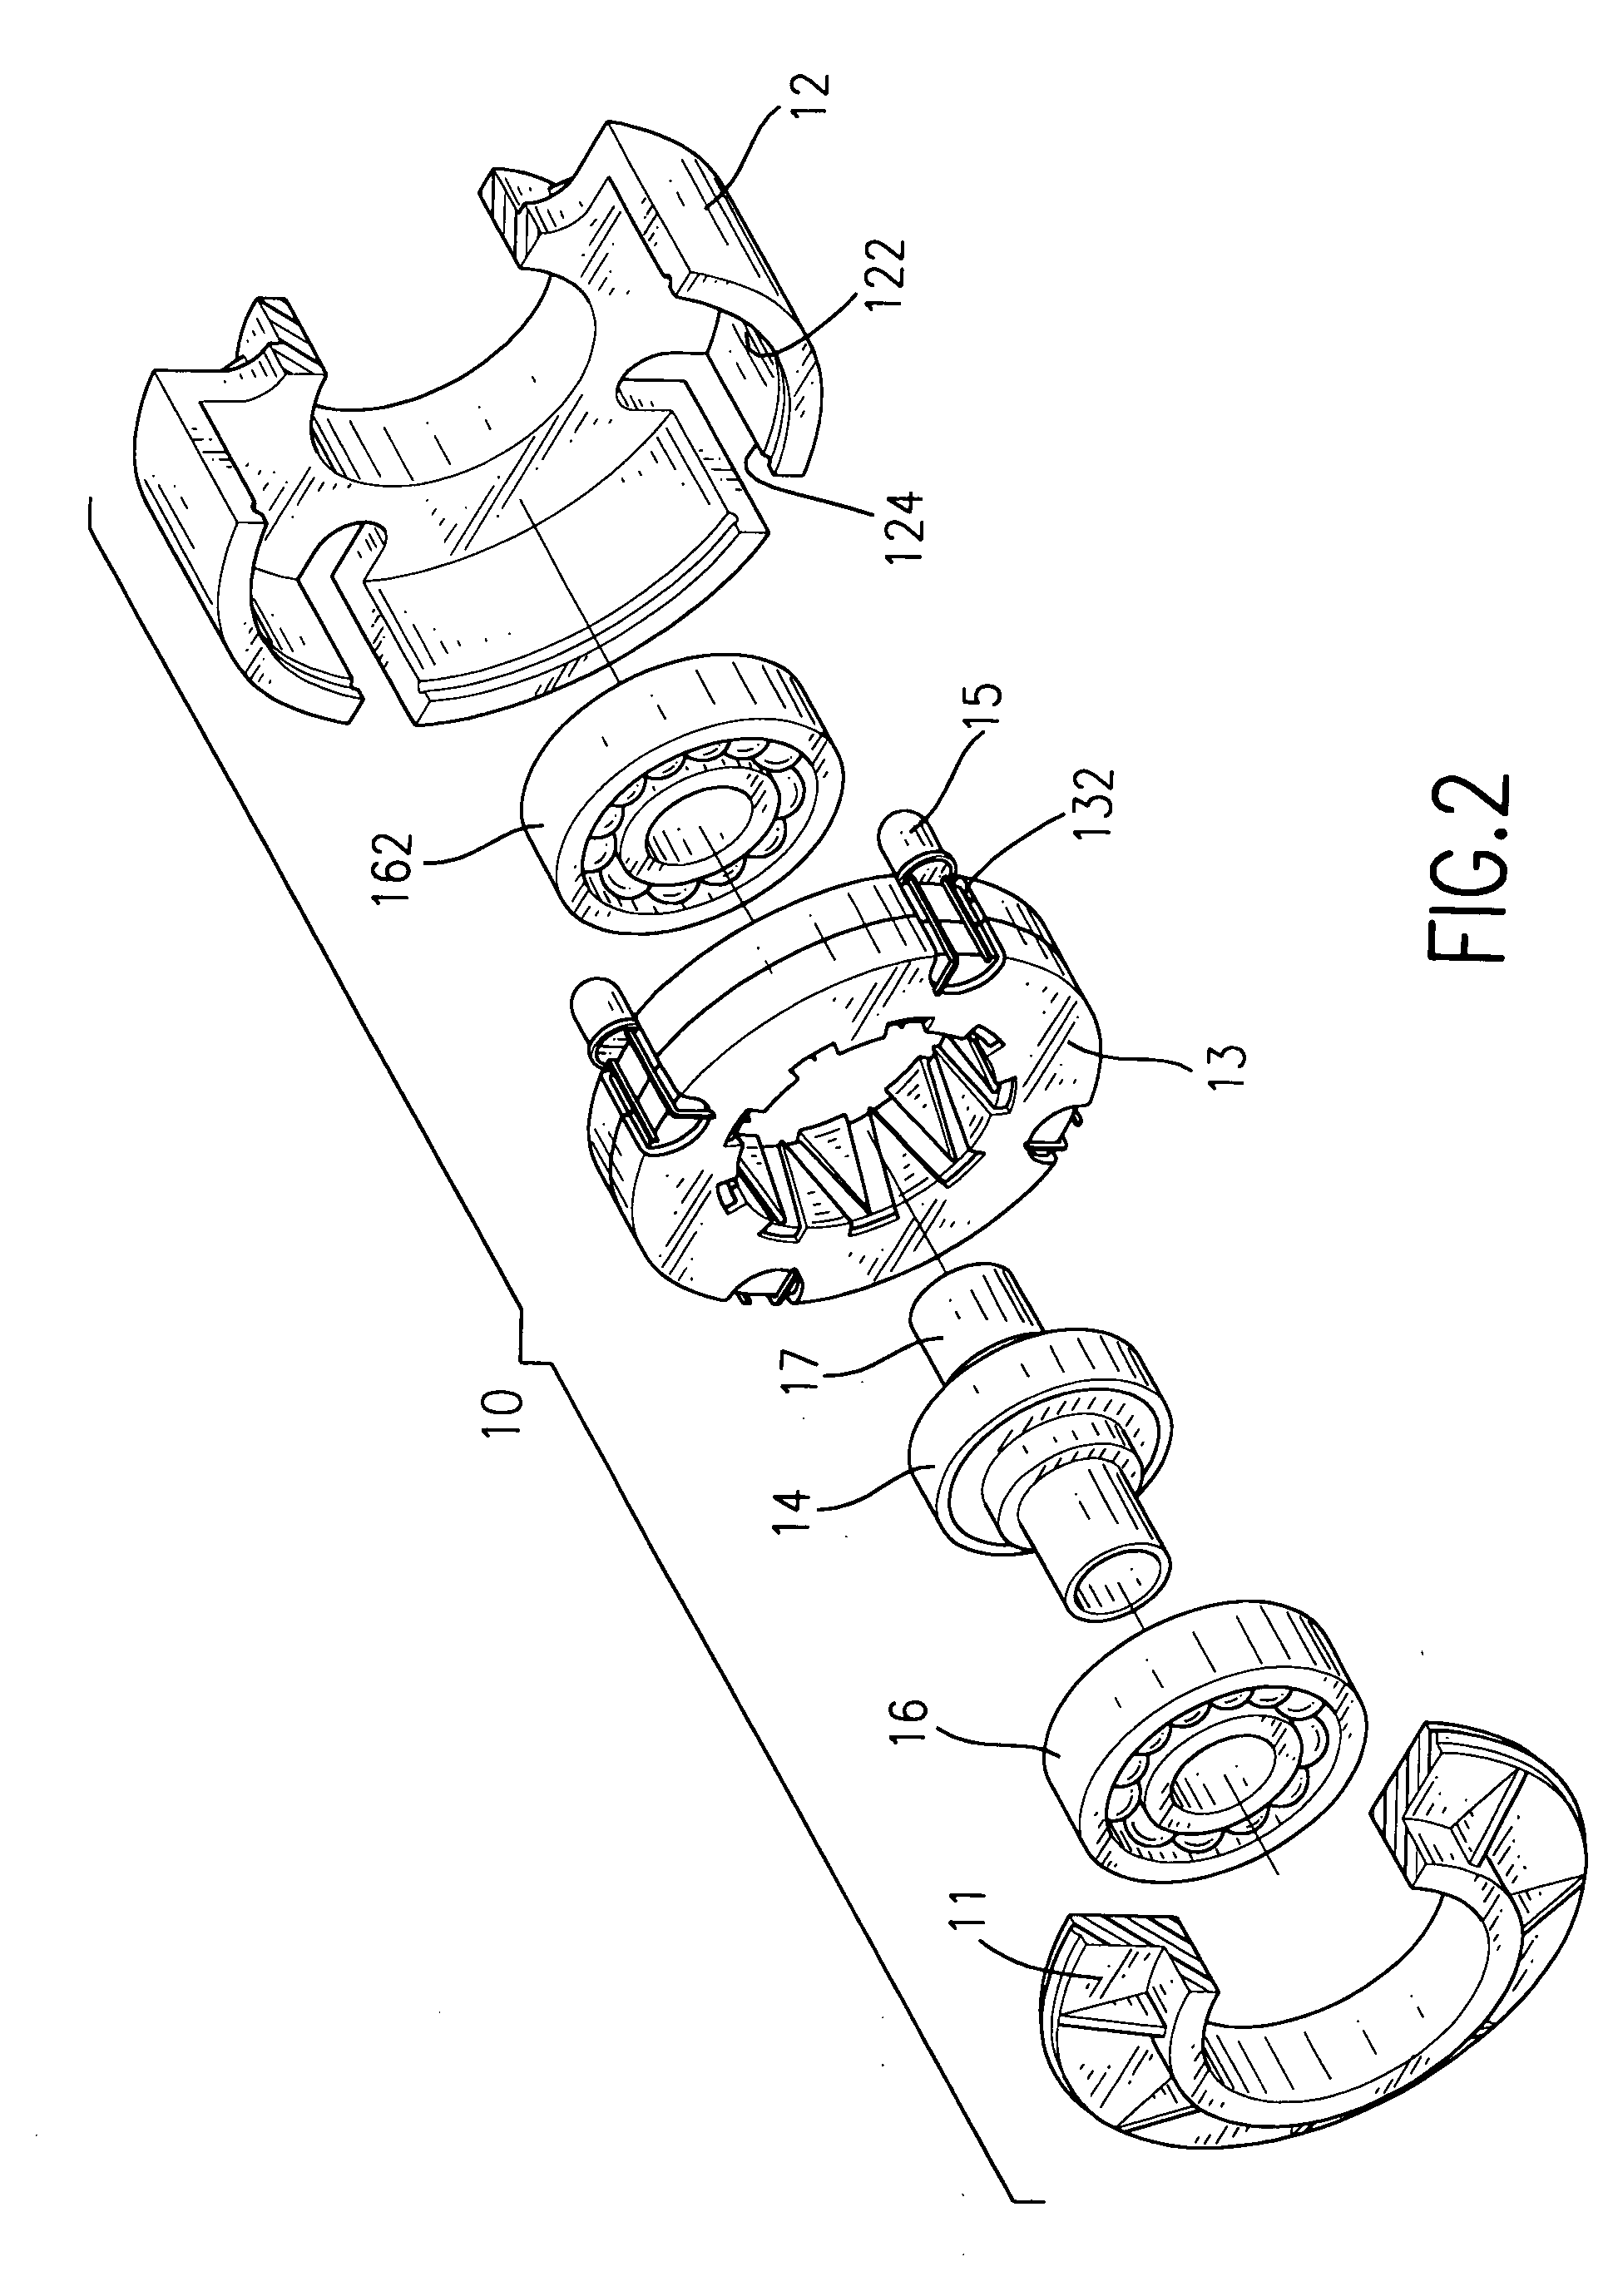 Skate wheels incorporating transverse-mounted and self-powered illuminating devices